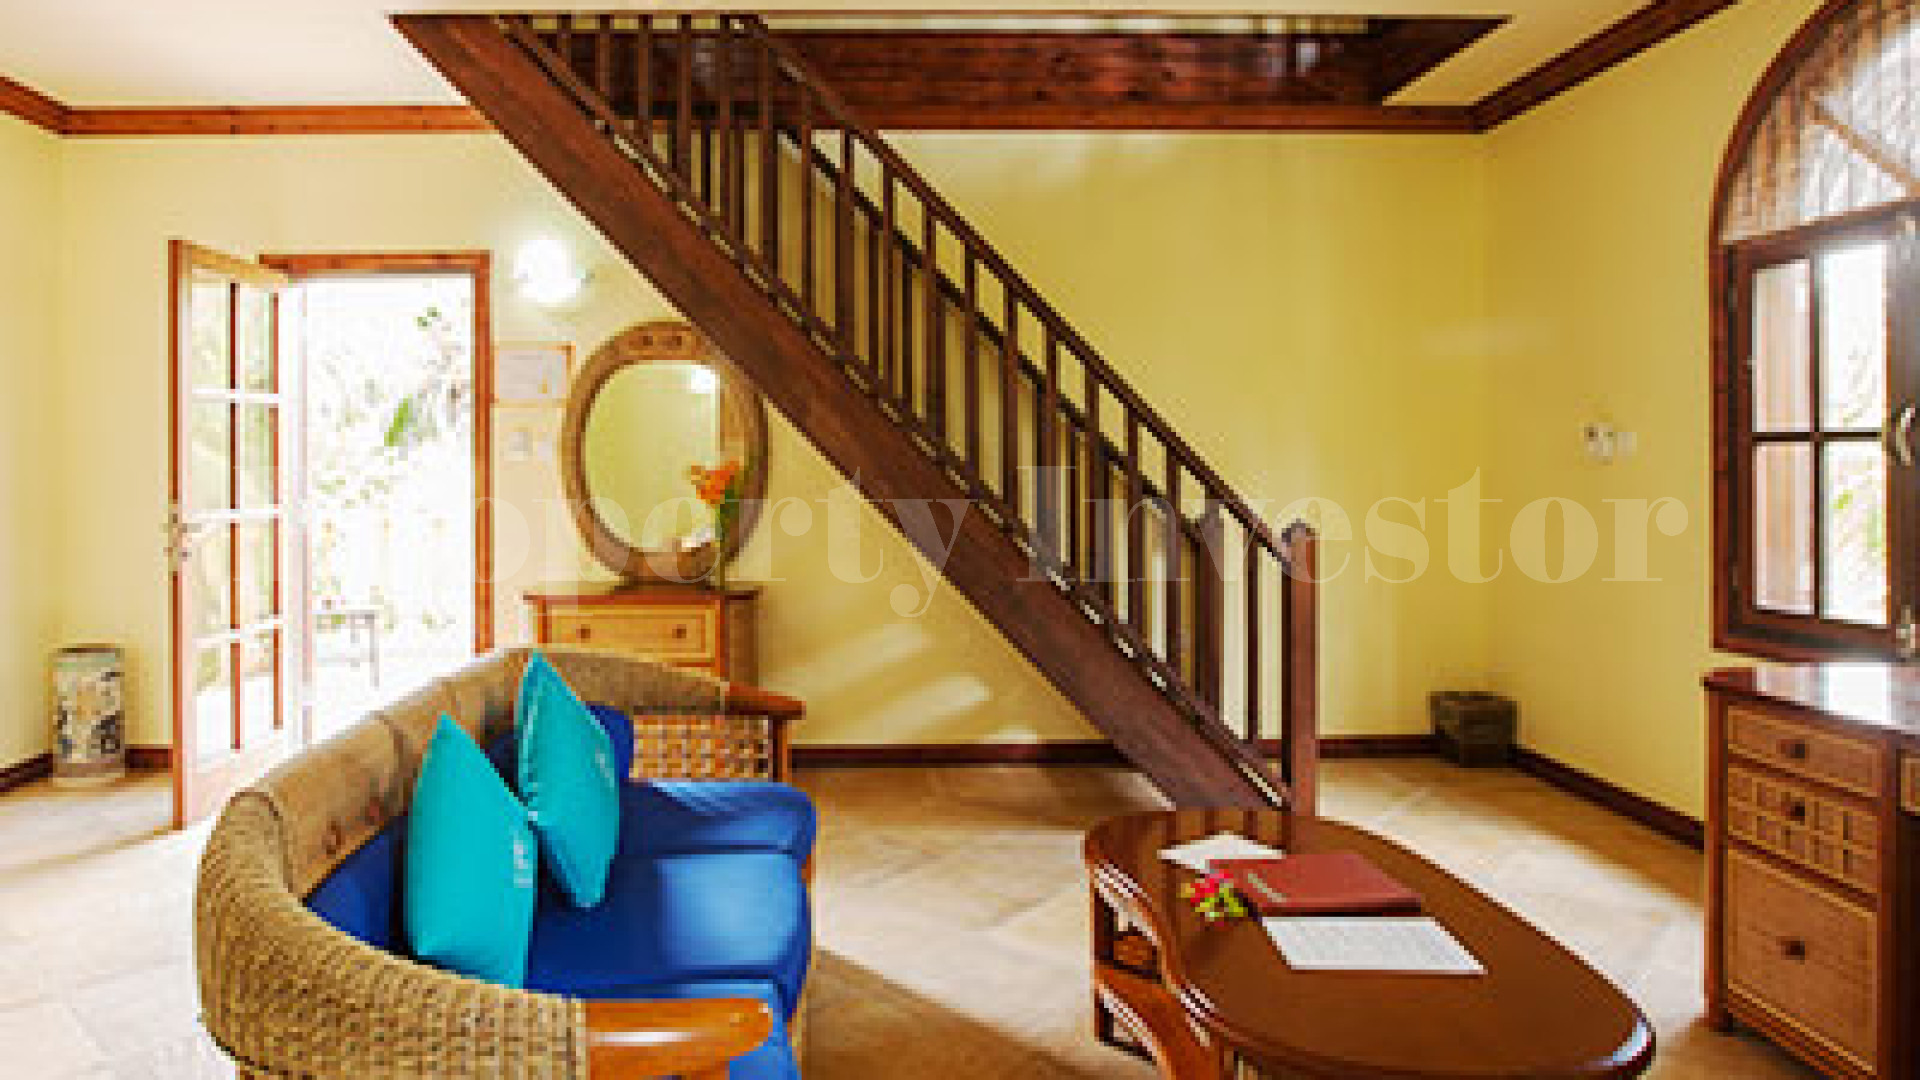 Beautiful 4* Star Boutique Beachfront Island Hotel with 26 Suites for Sale on Praslin Island, Seychelles